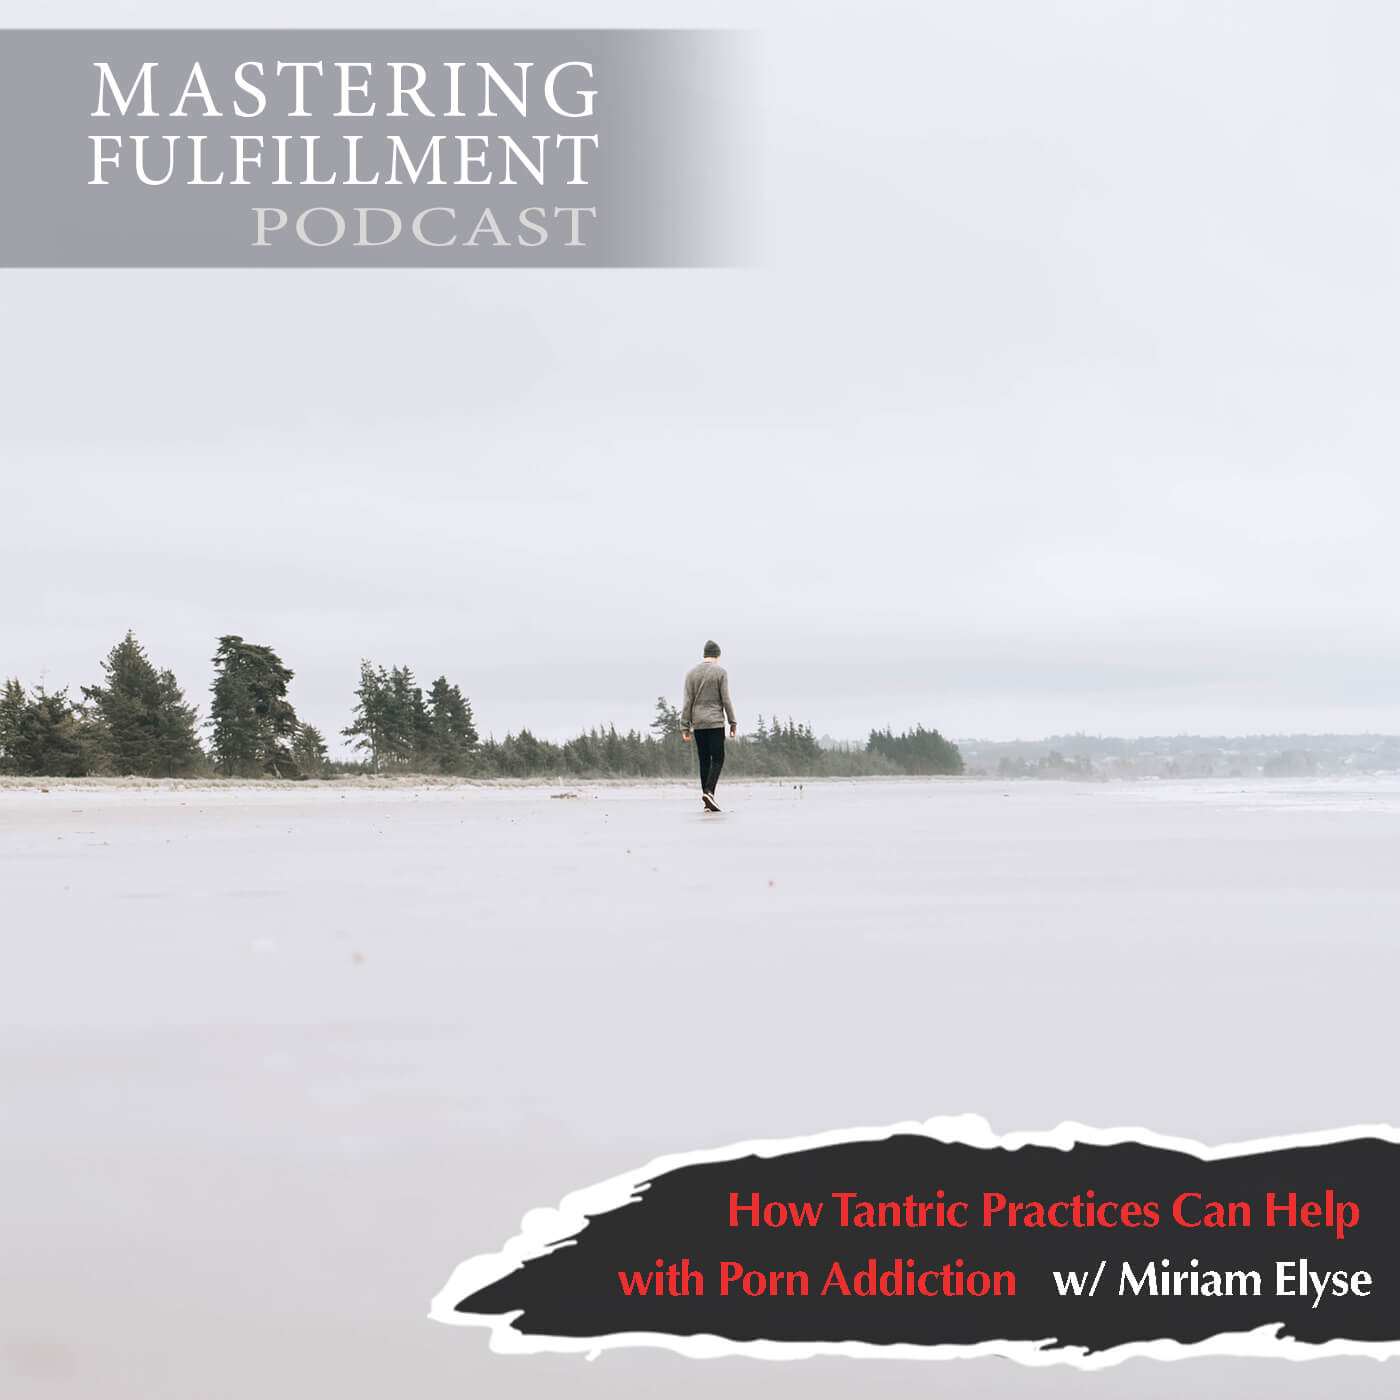 How Tantric Practices Can Help With Porn Addiction Josh interview Miriam Elyse 1400